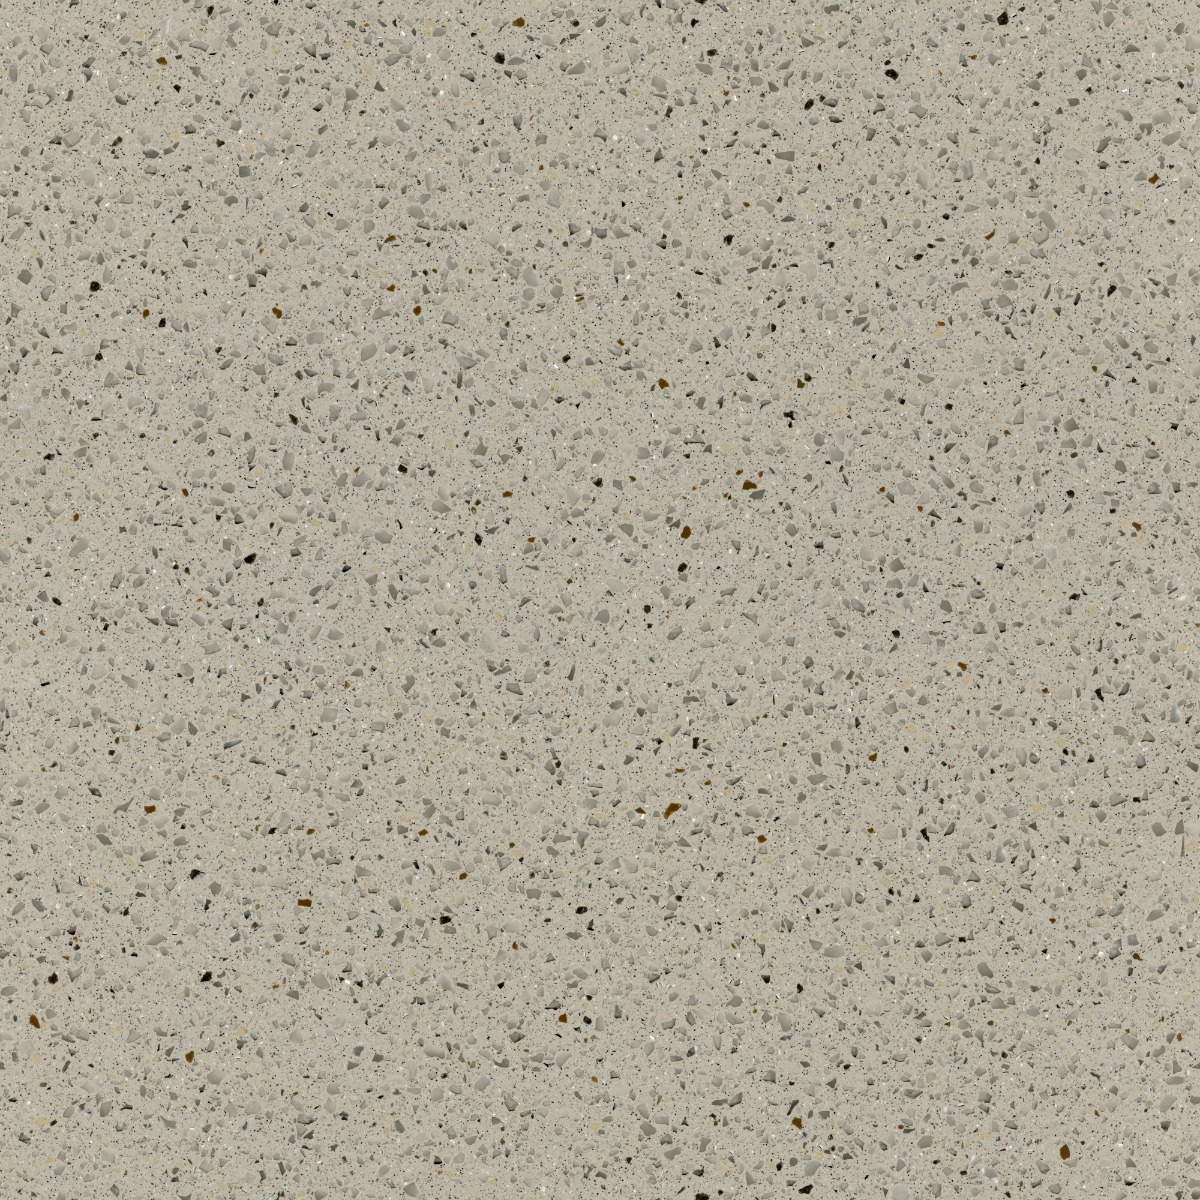 A seamless surfacing texture with gad-007 juno units arranged in a None pattern